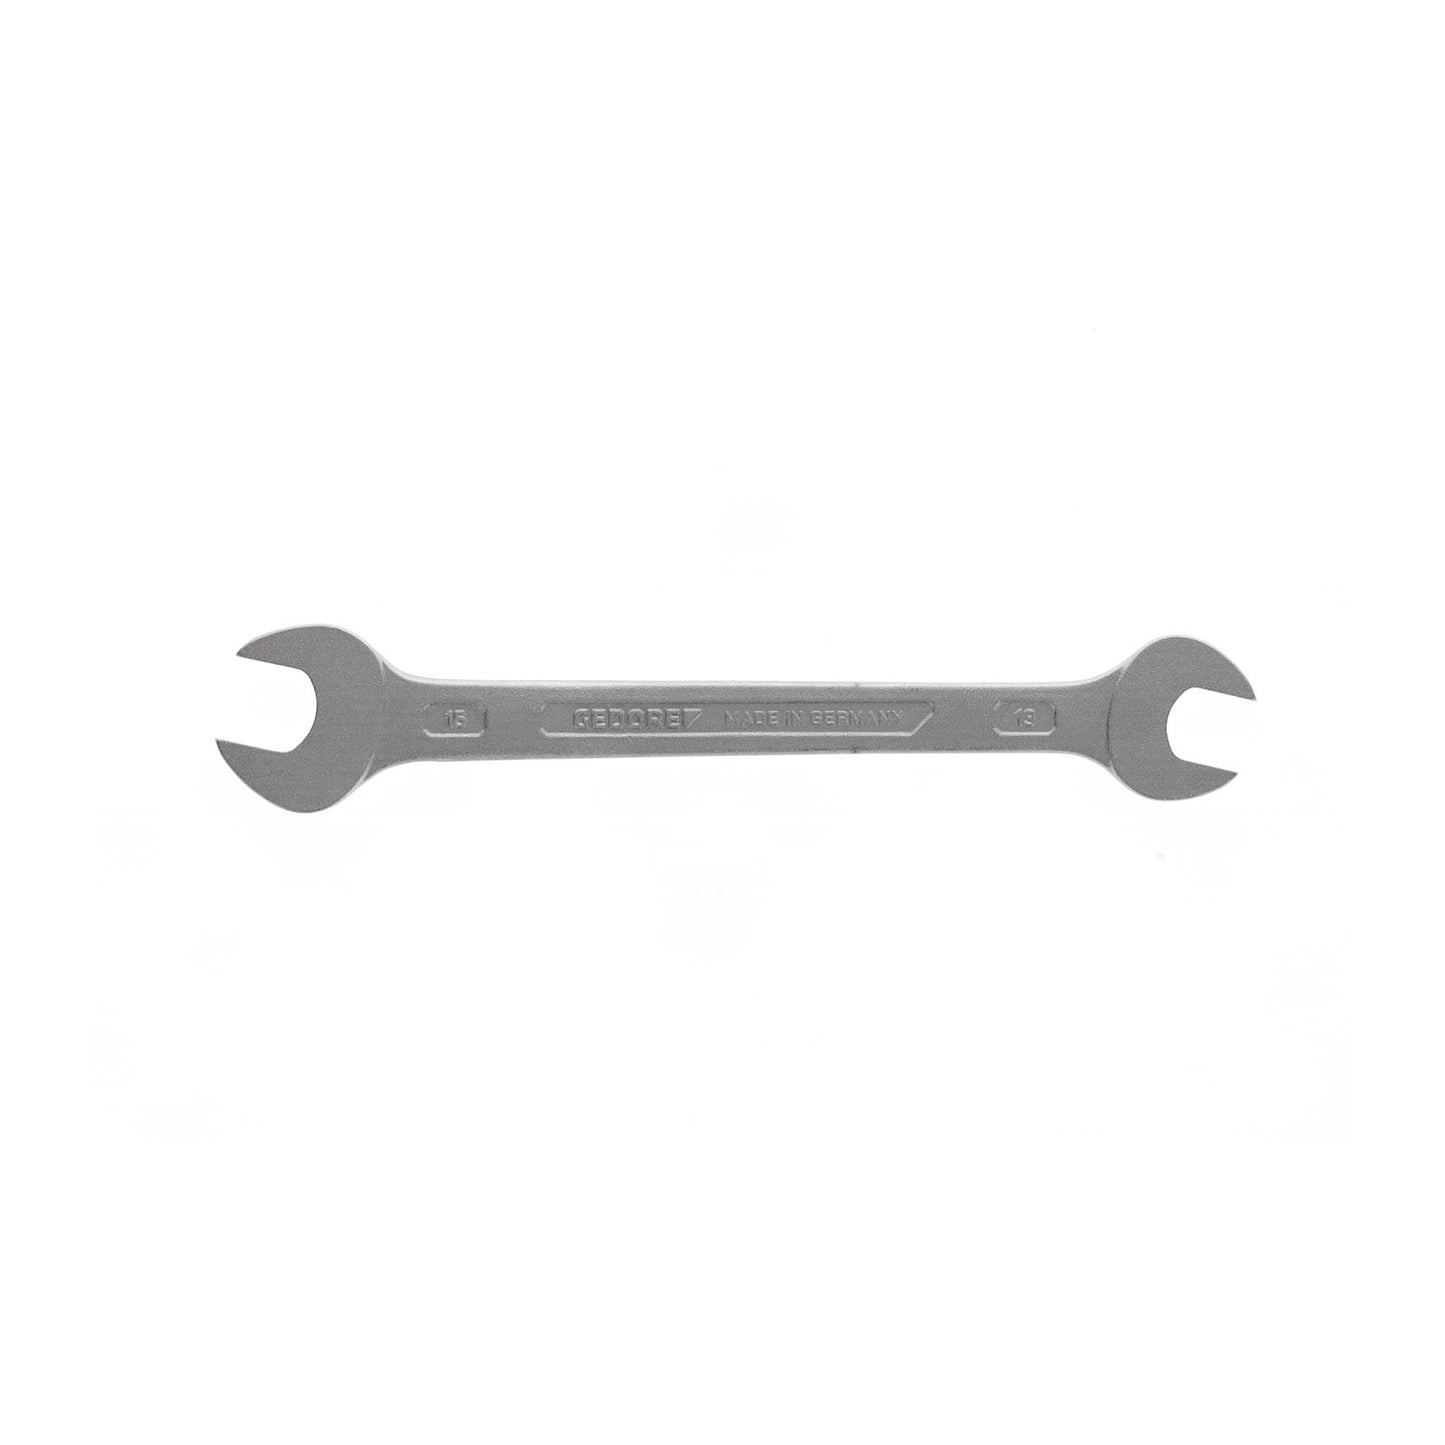 GEDORE 6 13X15 - 2-Mount Fixed Wrench, 13x15 (6065610)